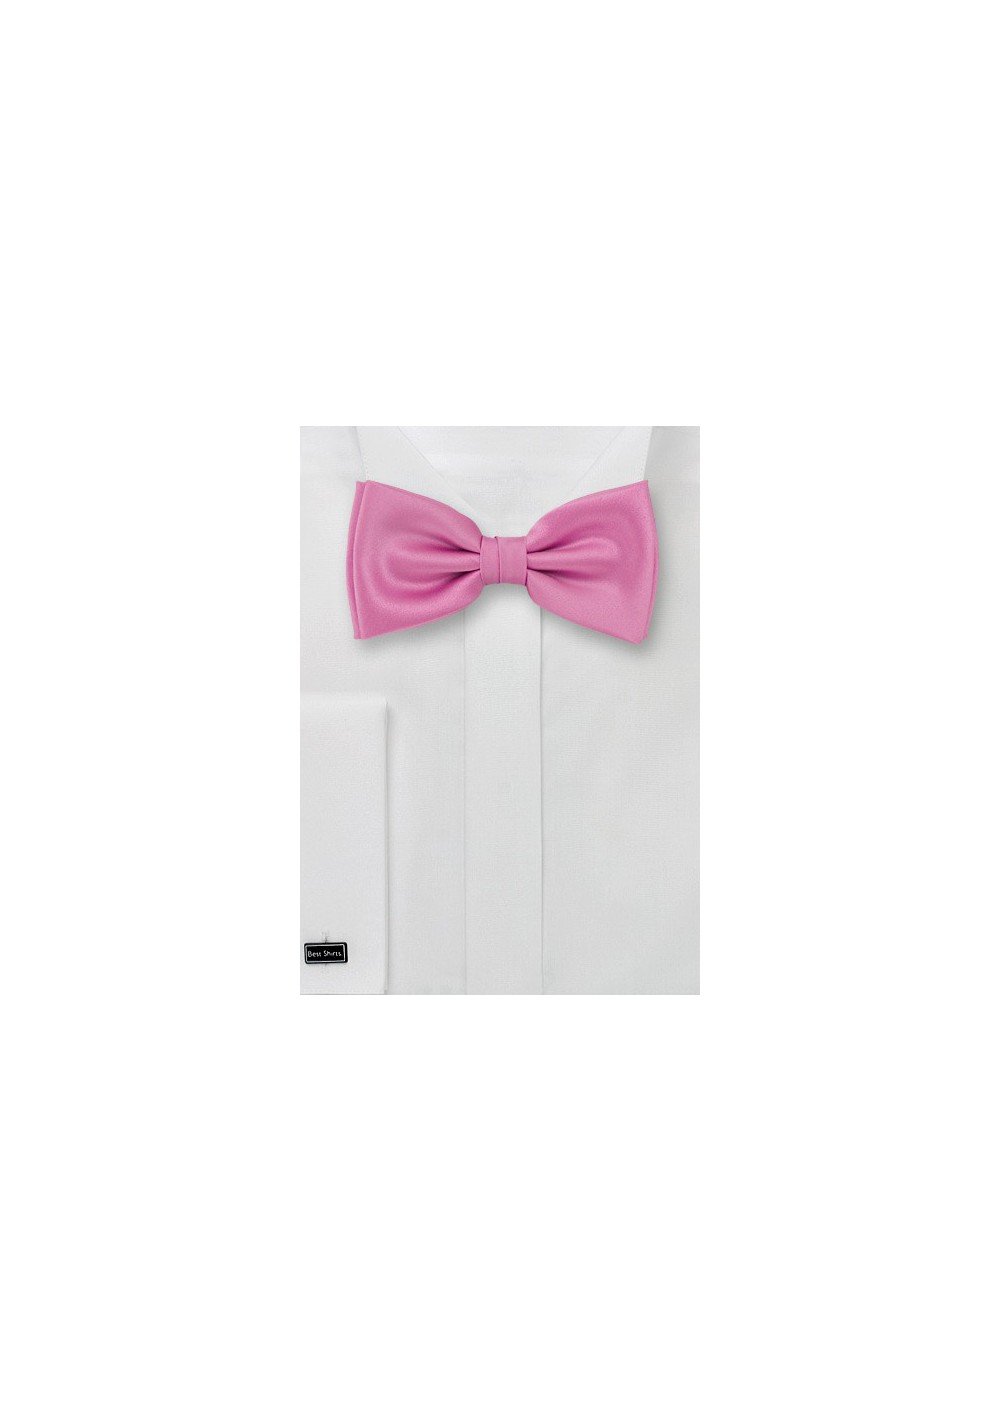 Rose-pink bow tie  - Pre-tied pink bow tie